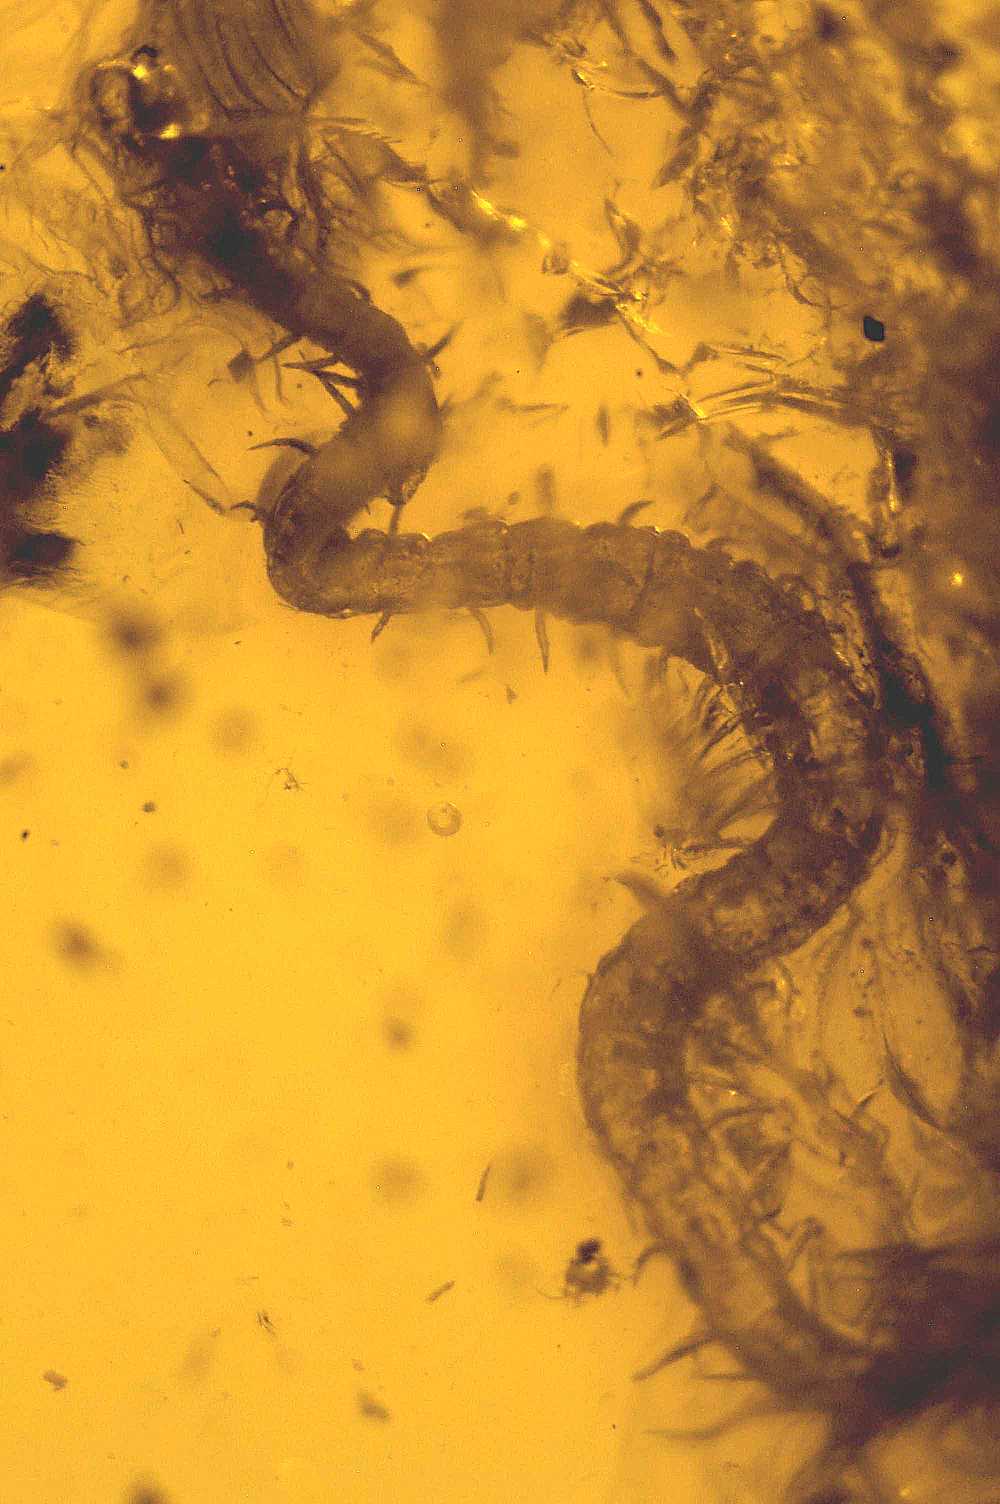  fossil centipede in Baltic amber